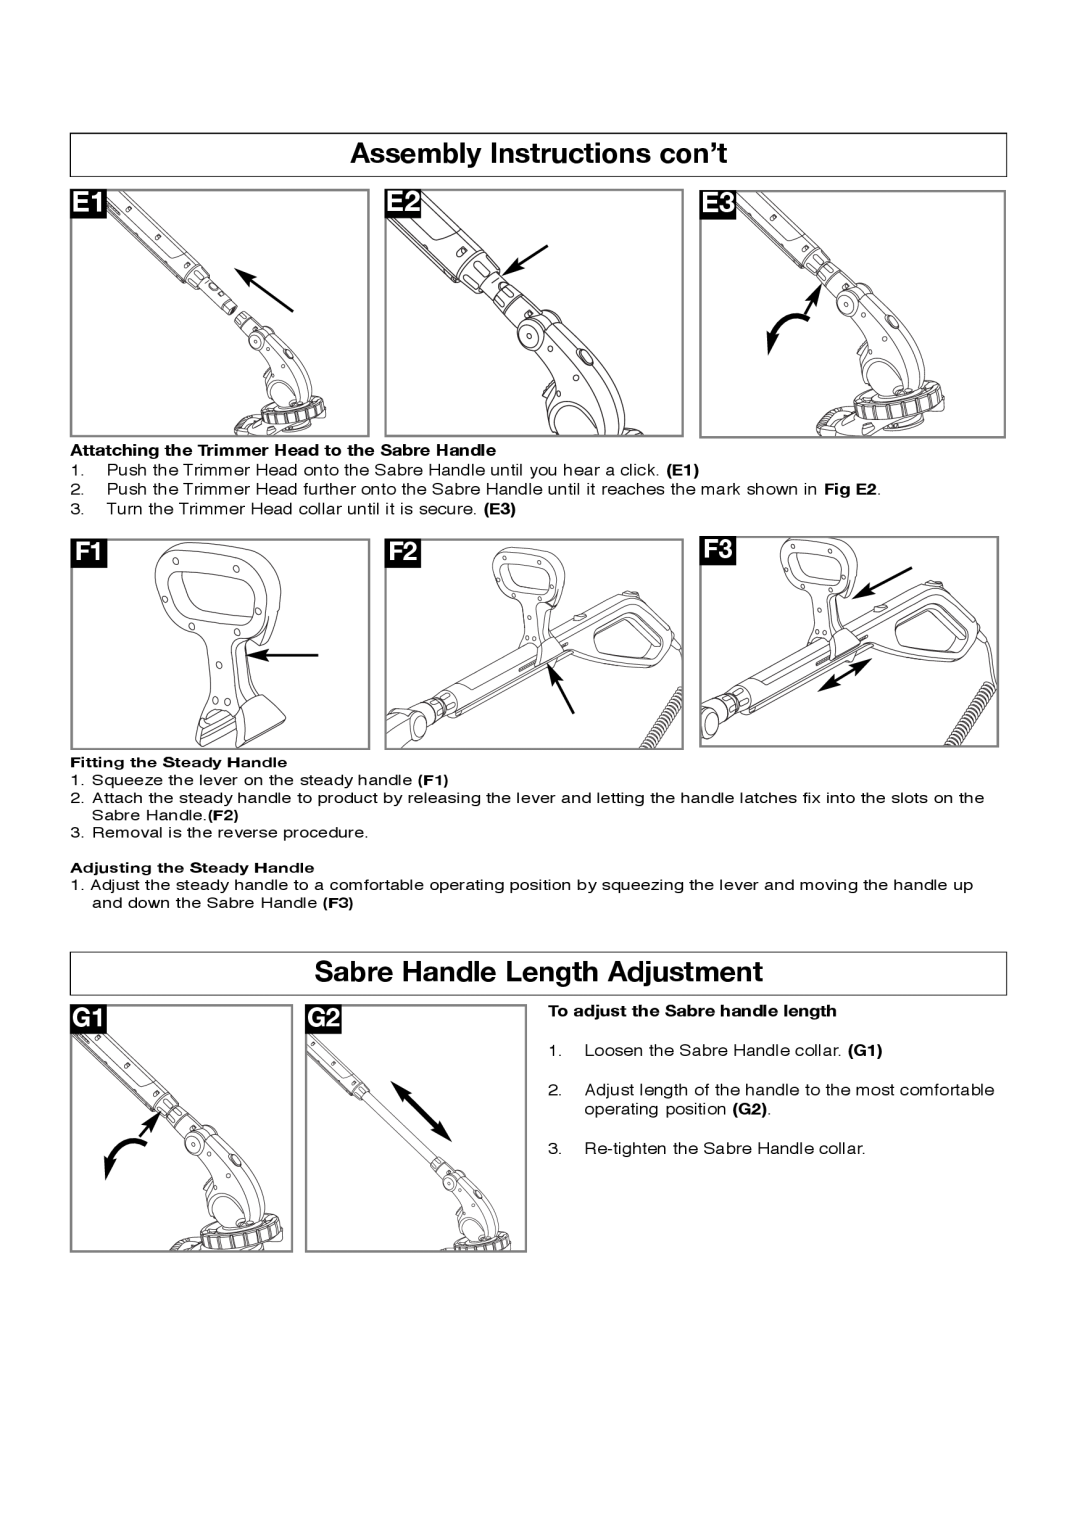 Flymo Sabre Trim manual Assembly Instructions con’t, Sabre Handle Length Adjustment 